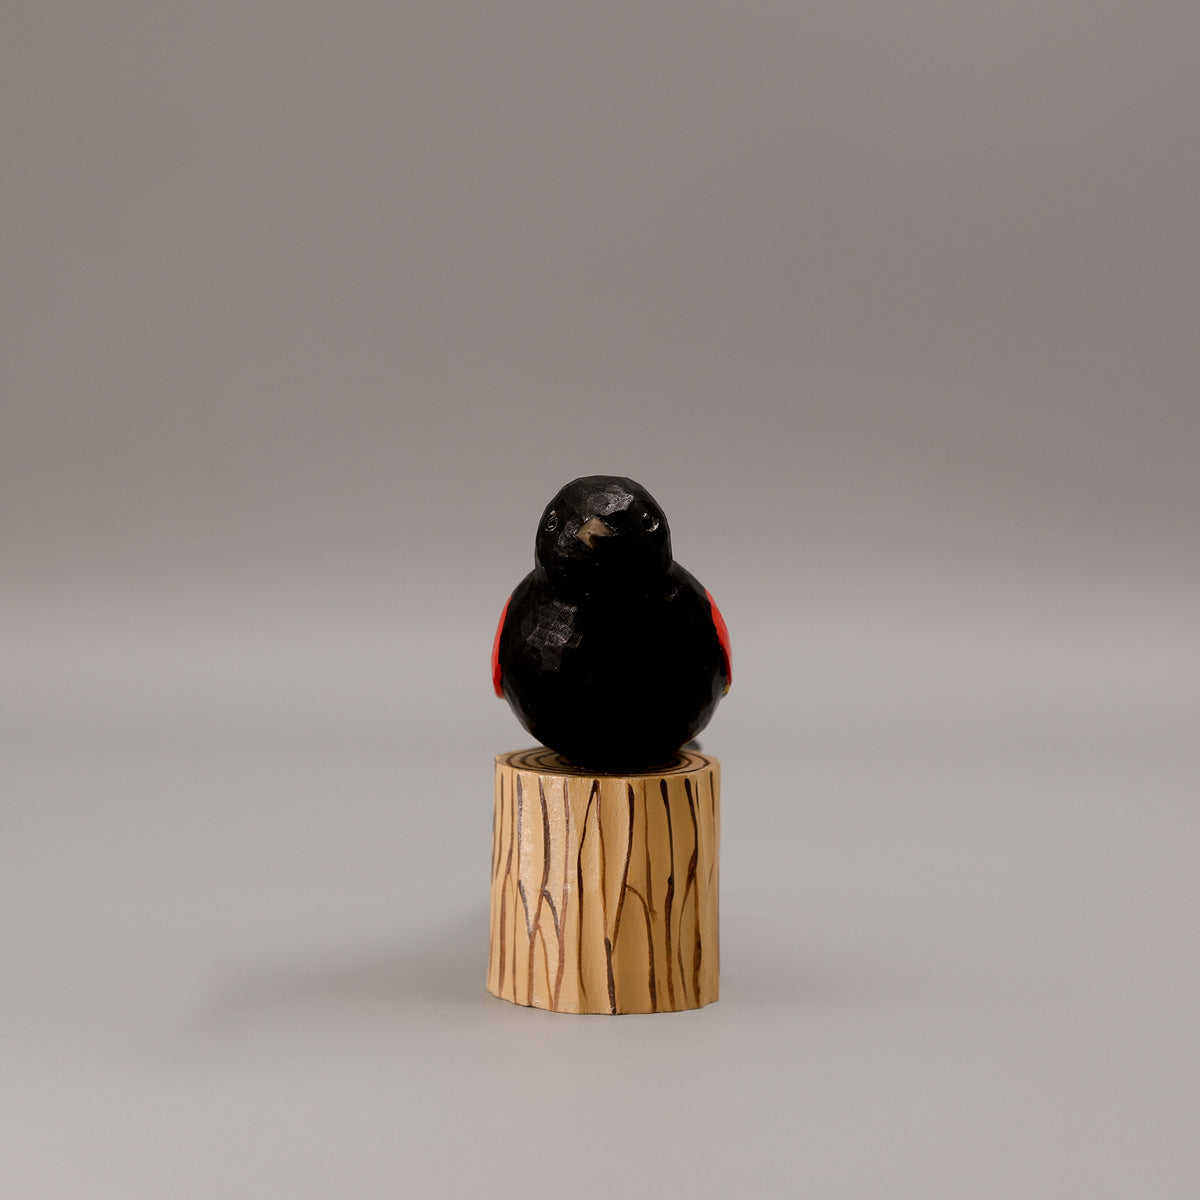 Red-Winged Blackbird + Stand